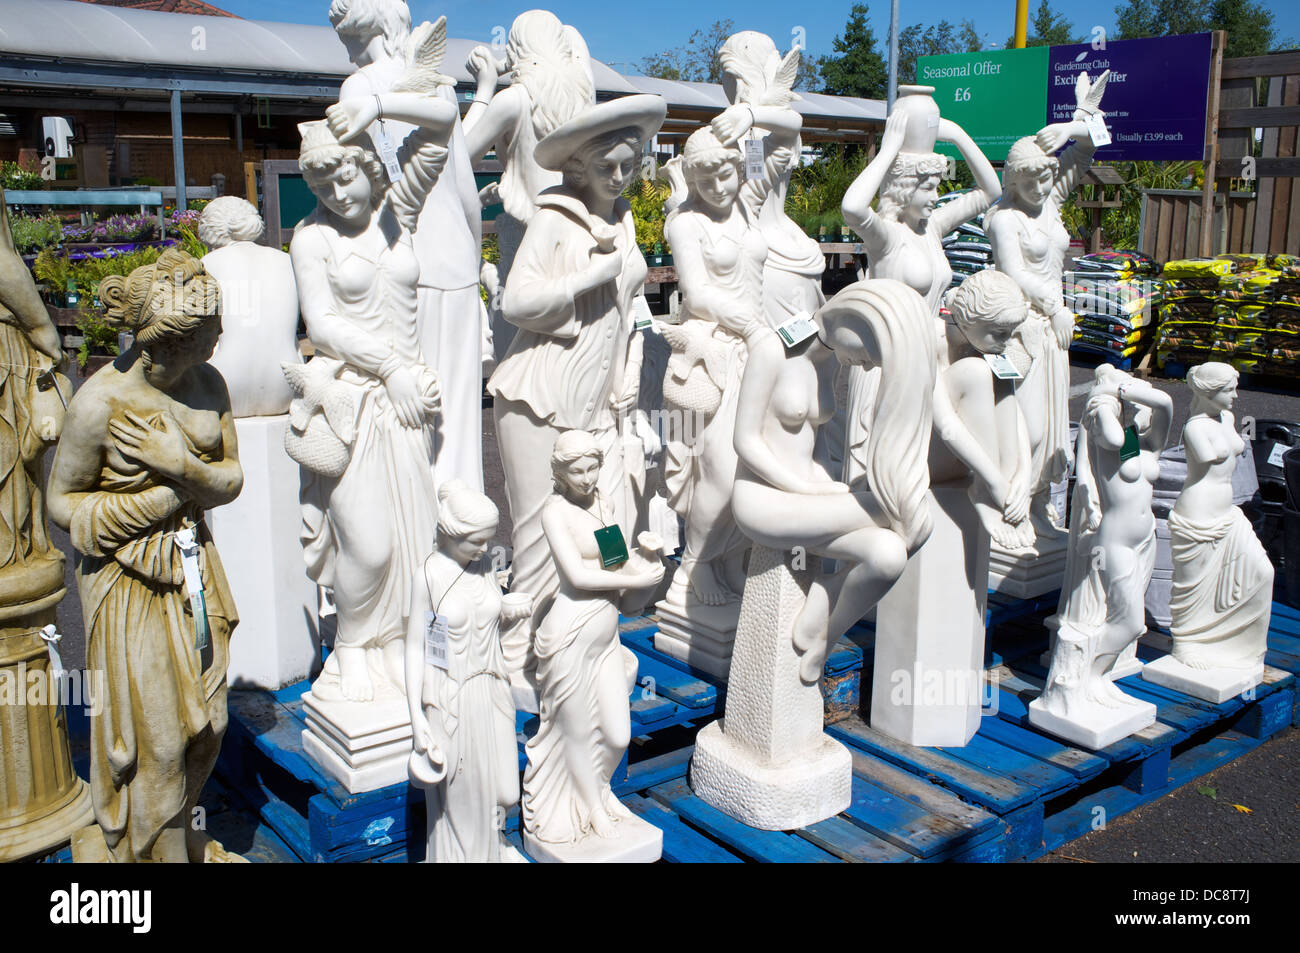 Garden Statues For Sale At Garden Centre Stock Photo 59201622 Alamy